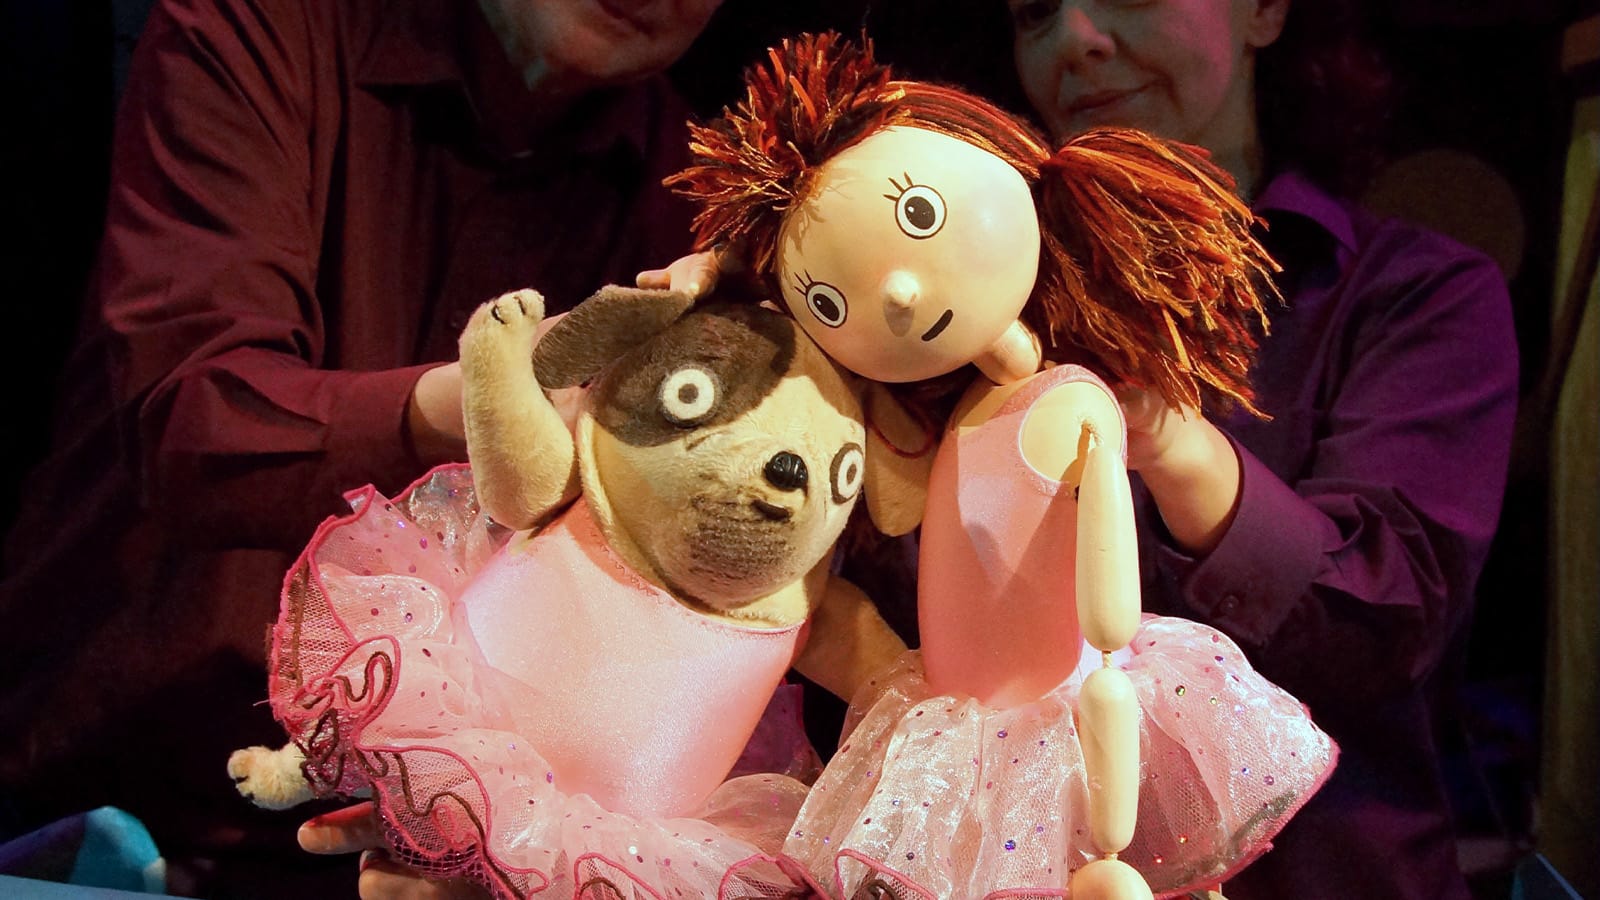 A puppet dog and girl in pink ballerina outfits